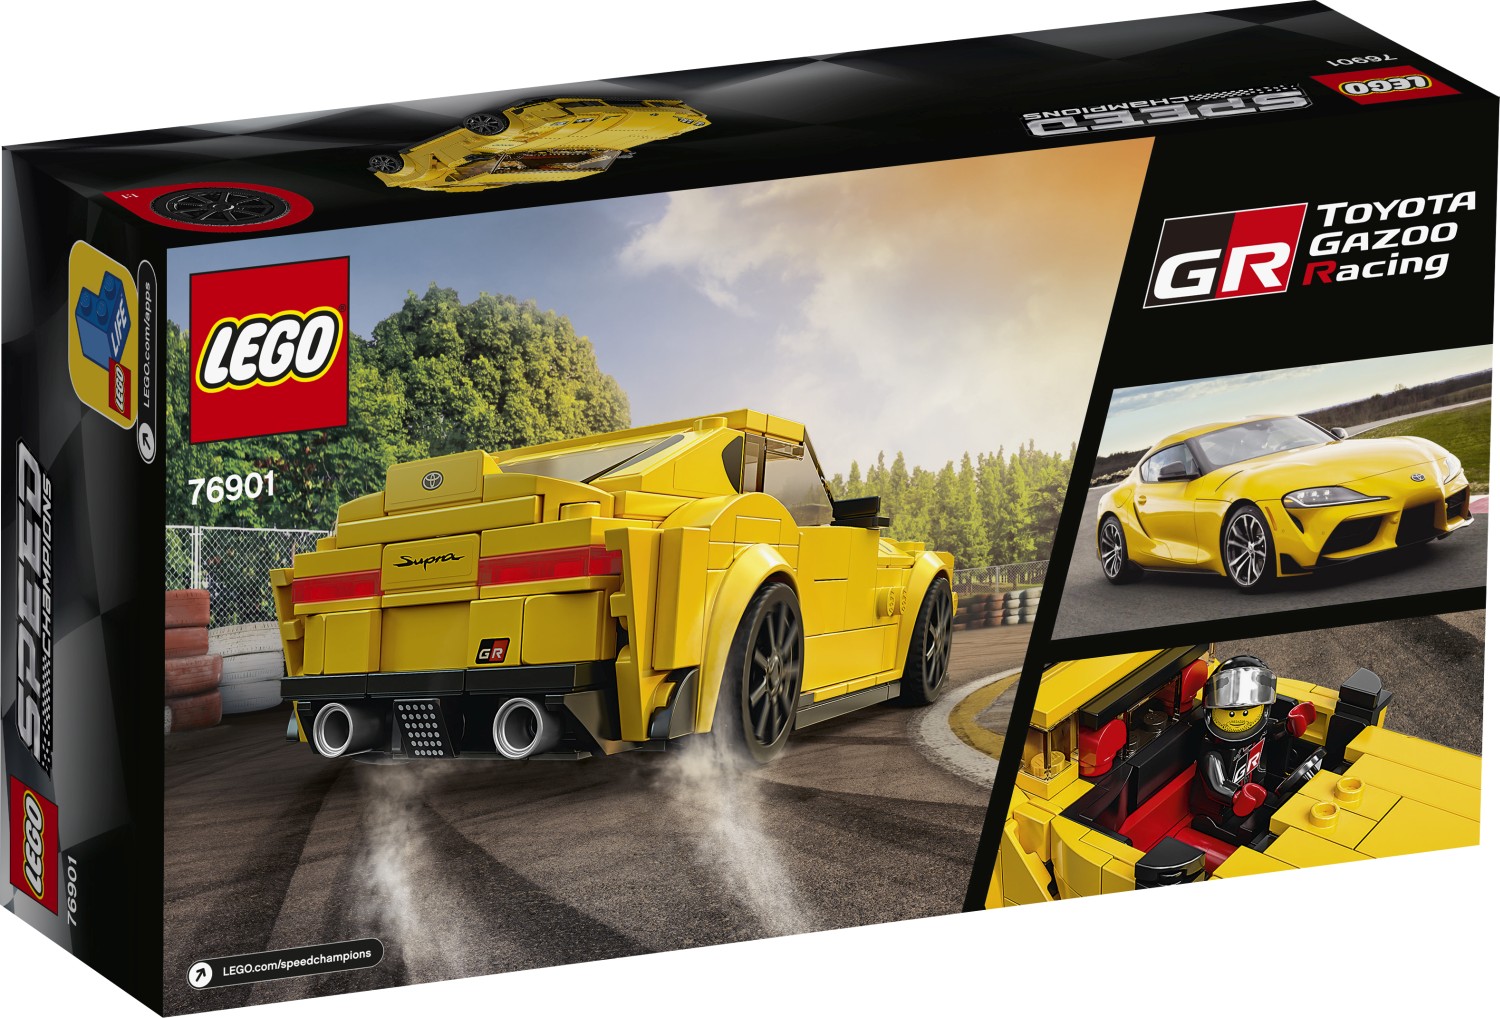 Lego Reveals Its 2021 Lineup Of Speed Champions Sets